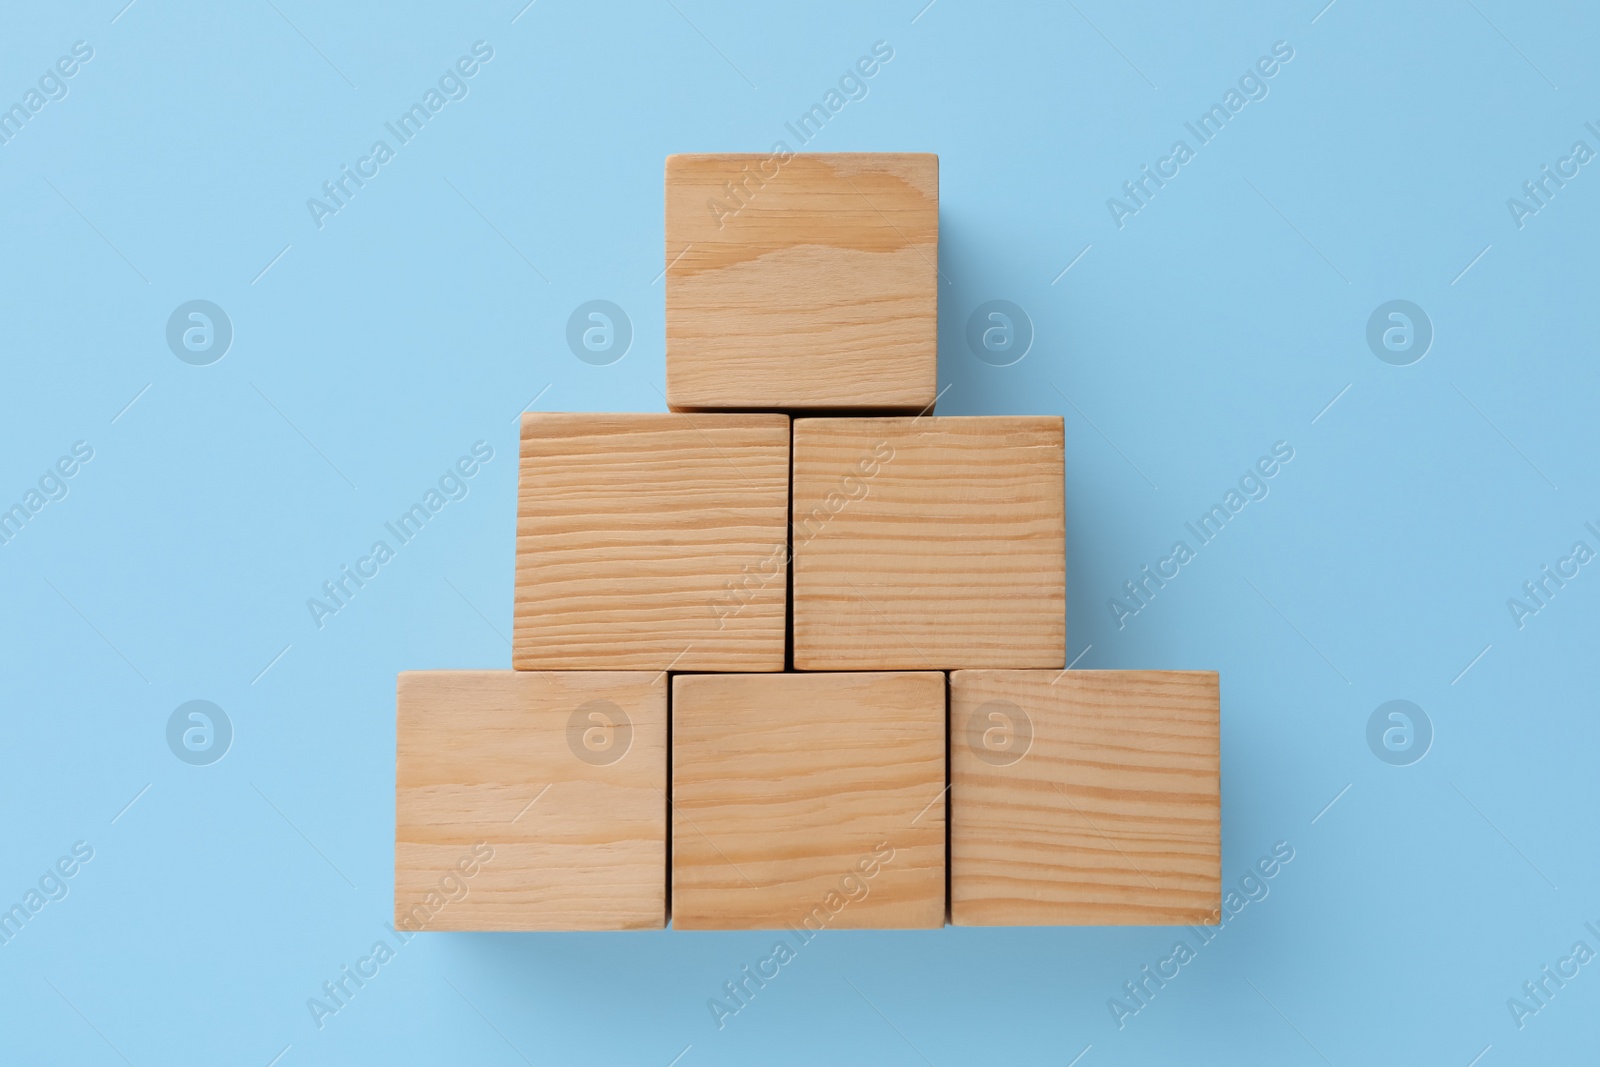 Photo of Pyramid made of wooden cubes on light blue background, top view. Management concept